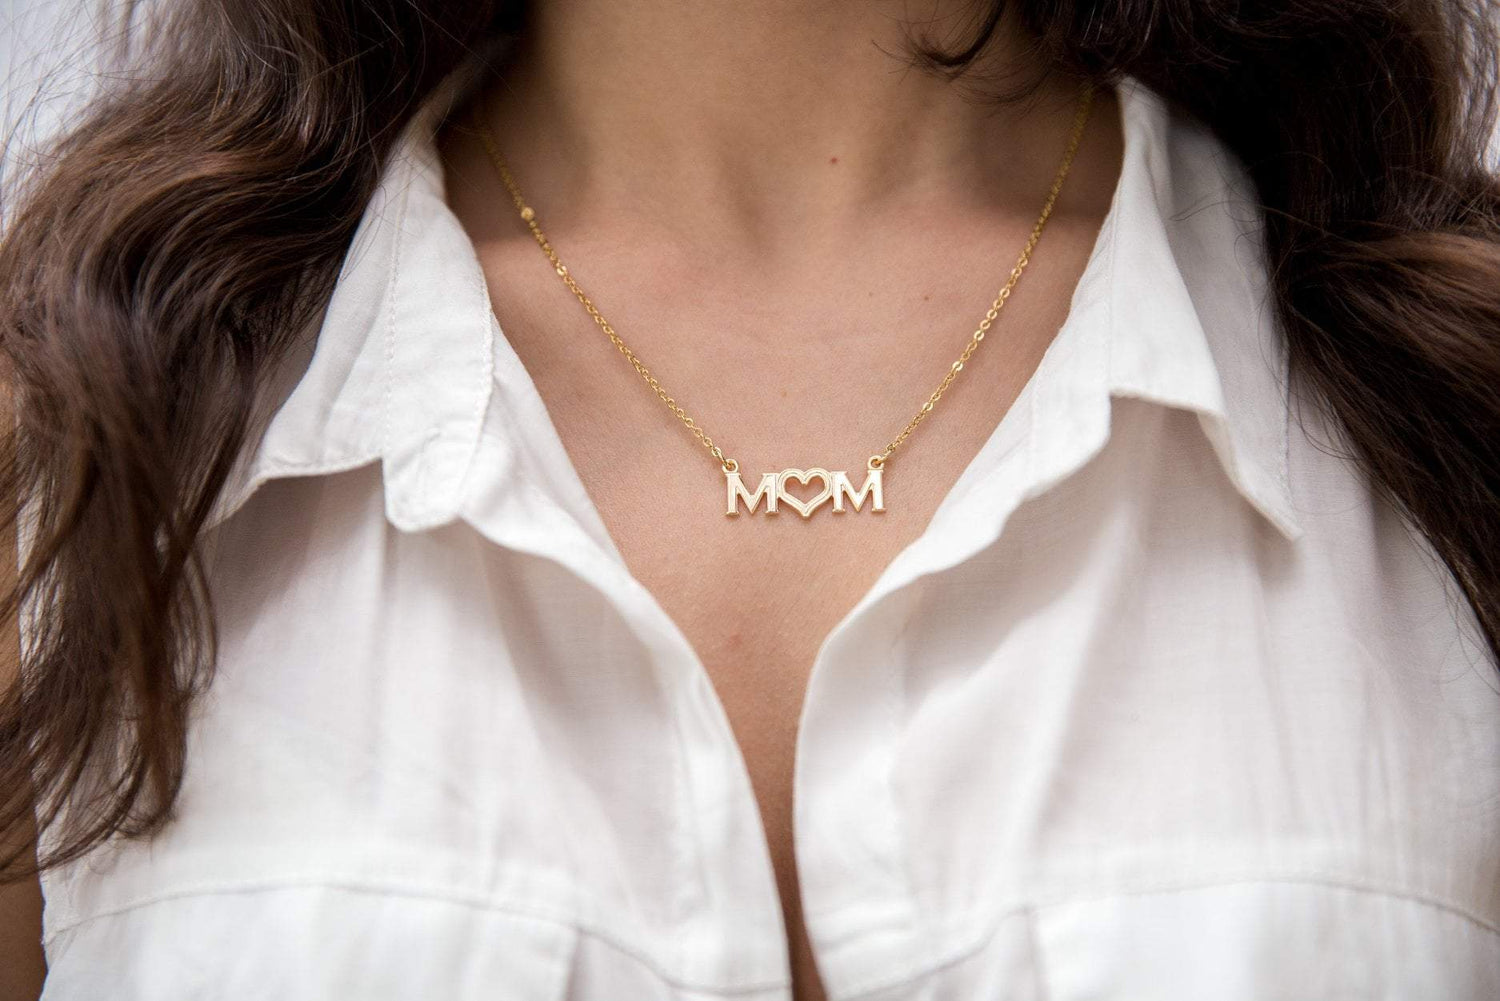 Bluenoemi Jewelry Necklaces Bluenoemi Mom Necklace for woman. Sterling Silver / Goldfilled